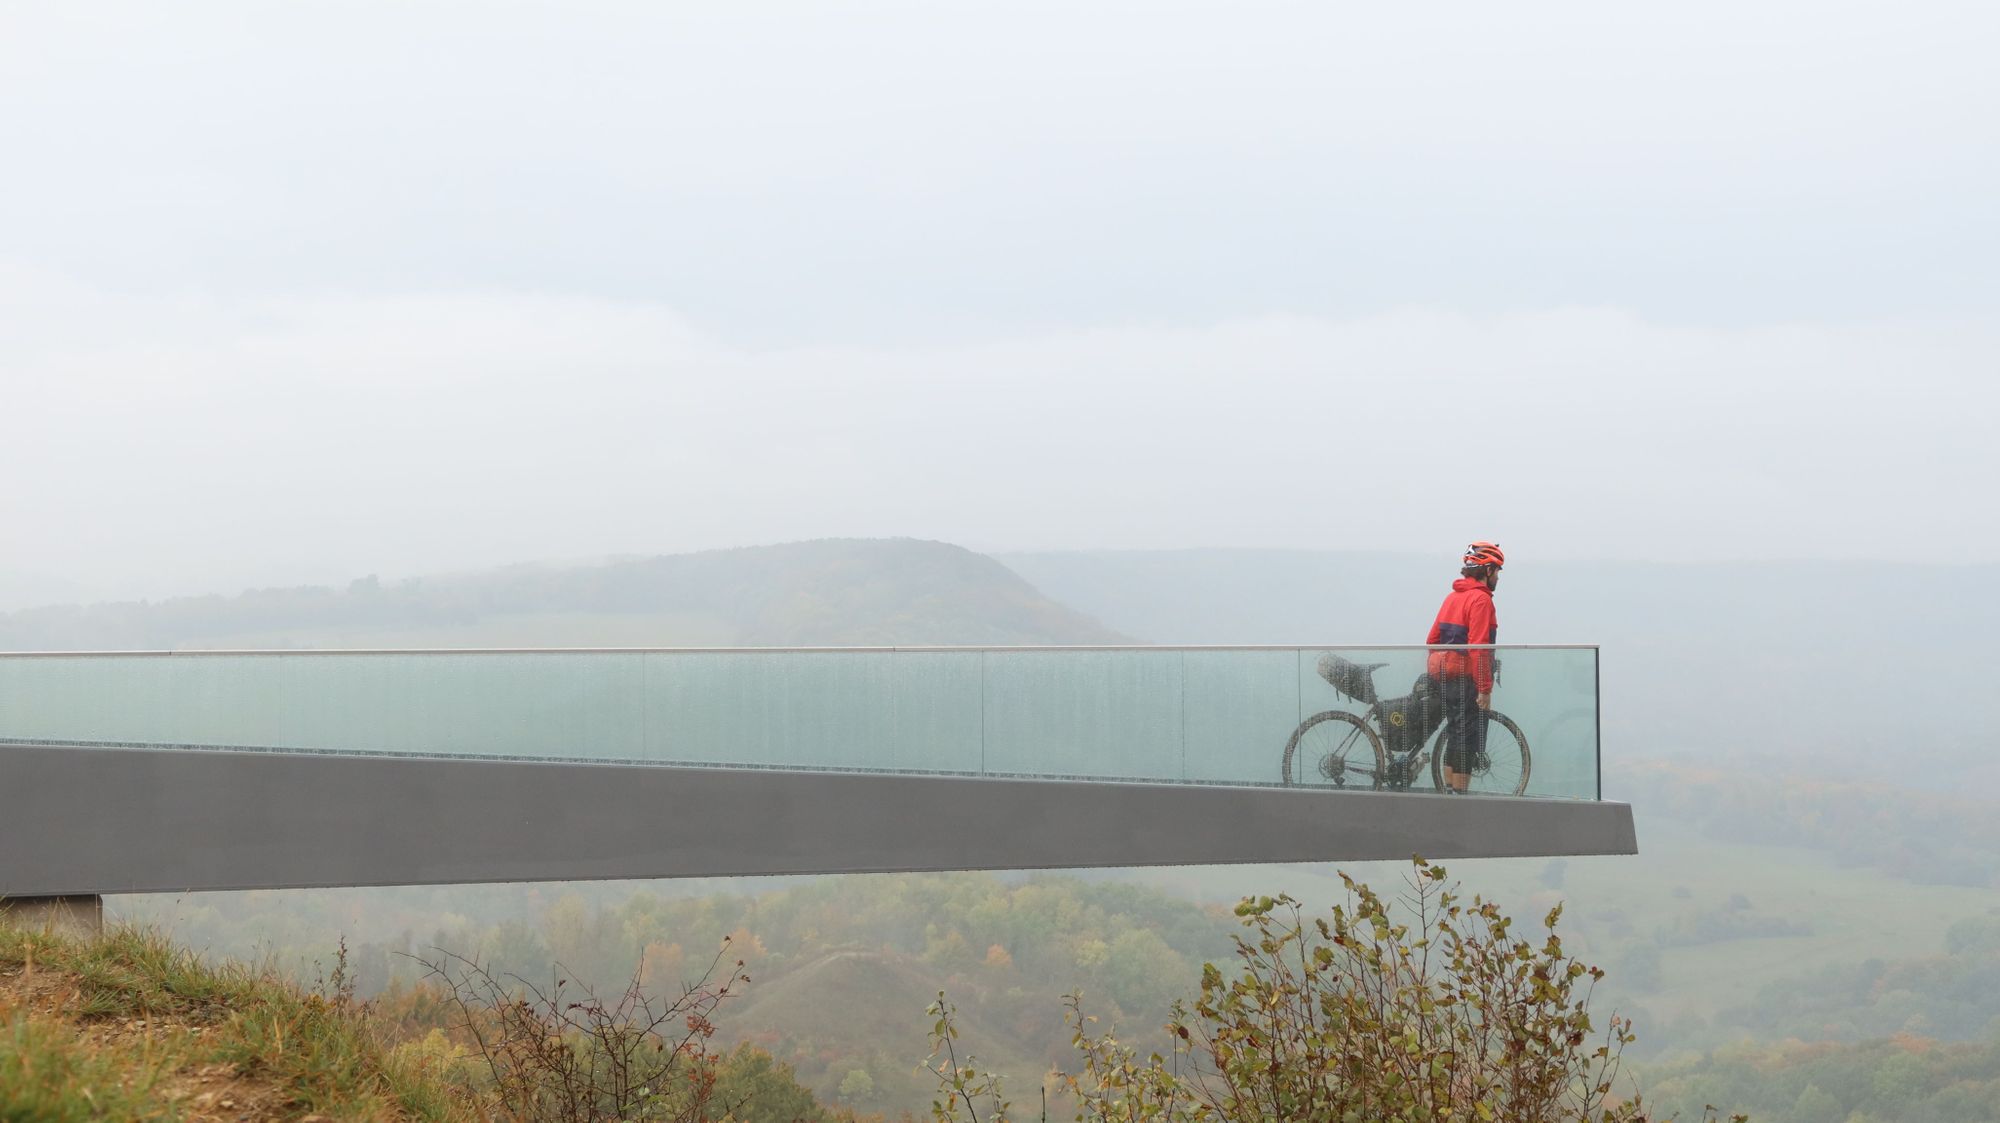 A cyclist looking out at the countryside near the former Iron Curtain in Germany.